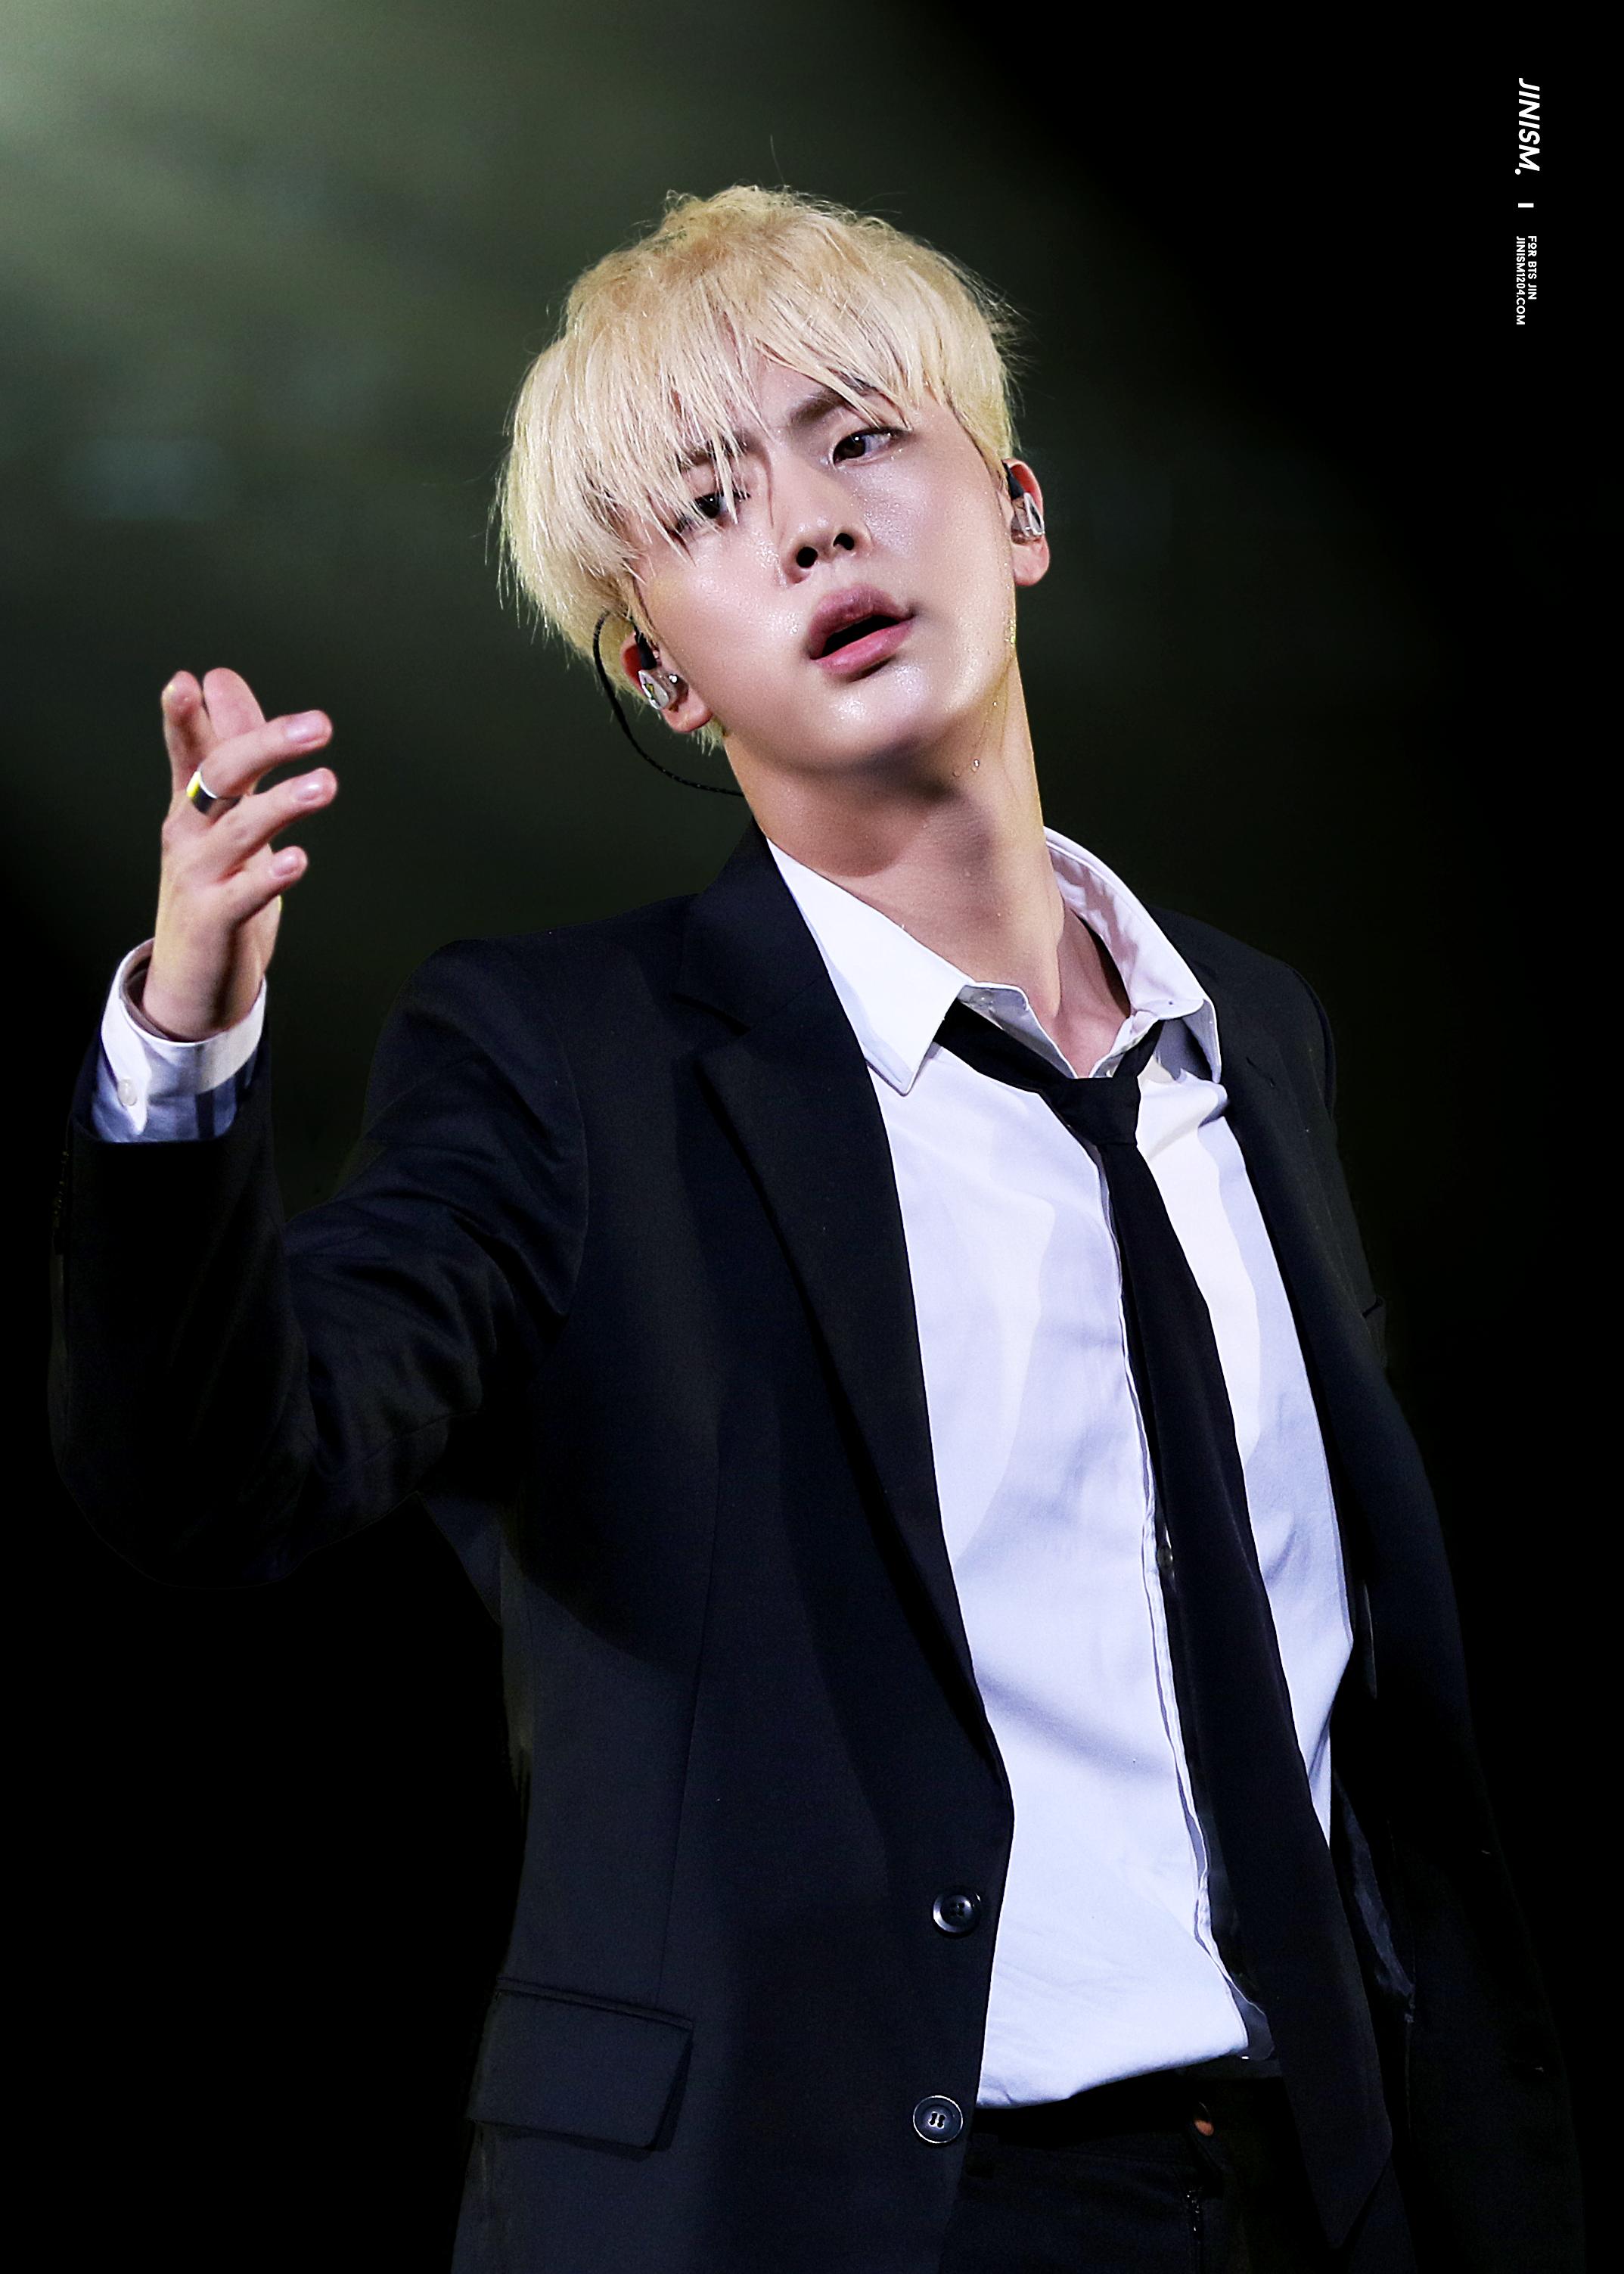 Jin shocked everyone when we suddenly went blonde earlier this year / Source: Jinism